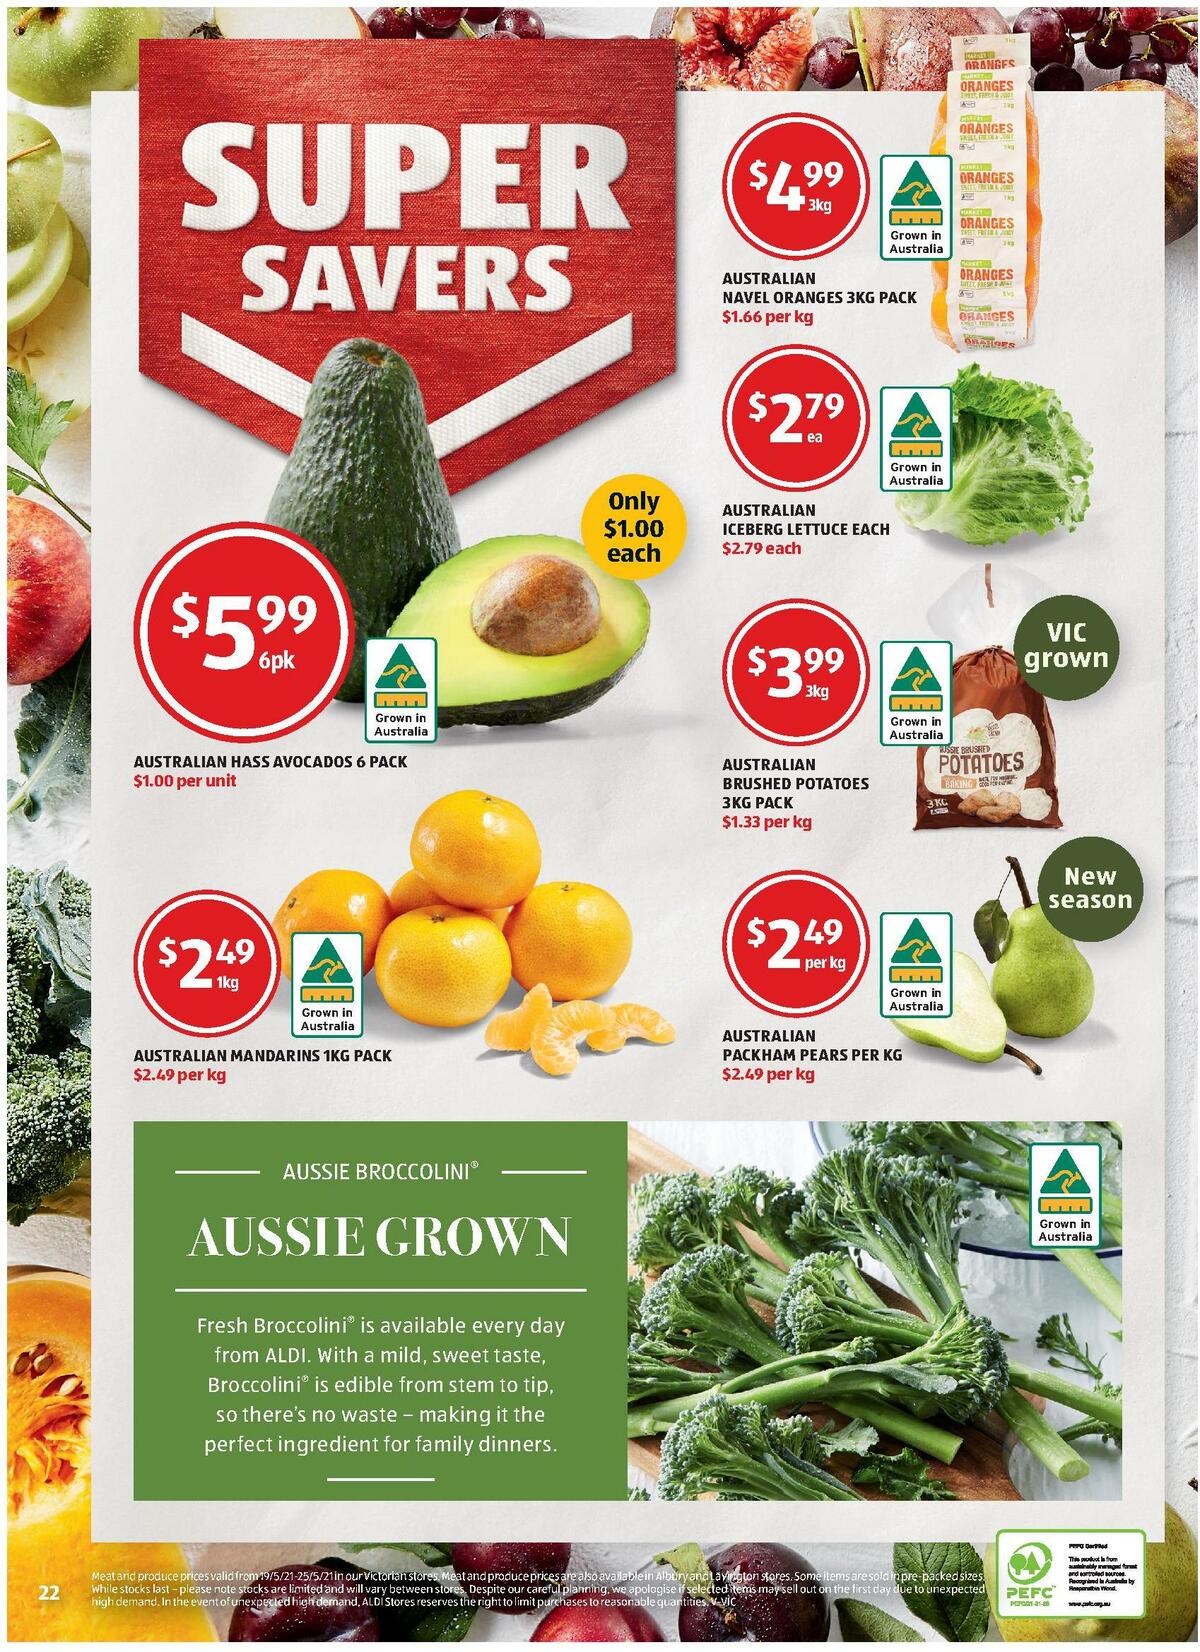 ALDI Catalogues from 26 May